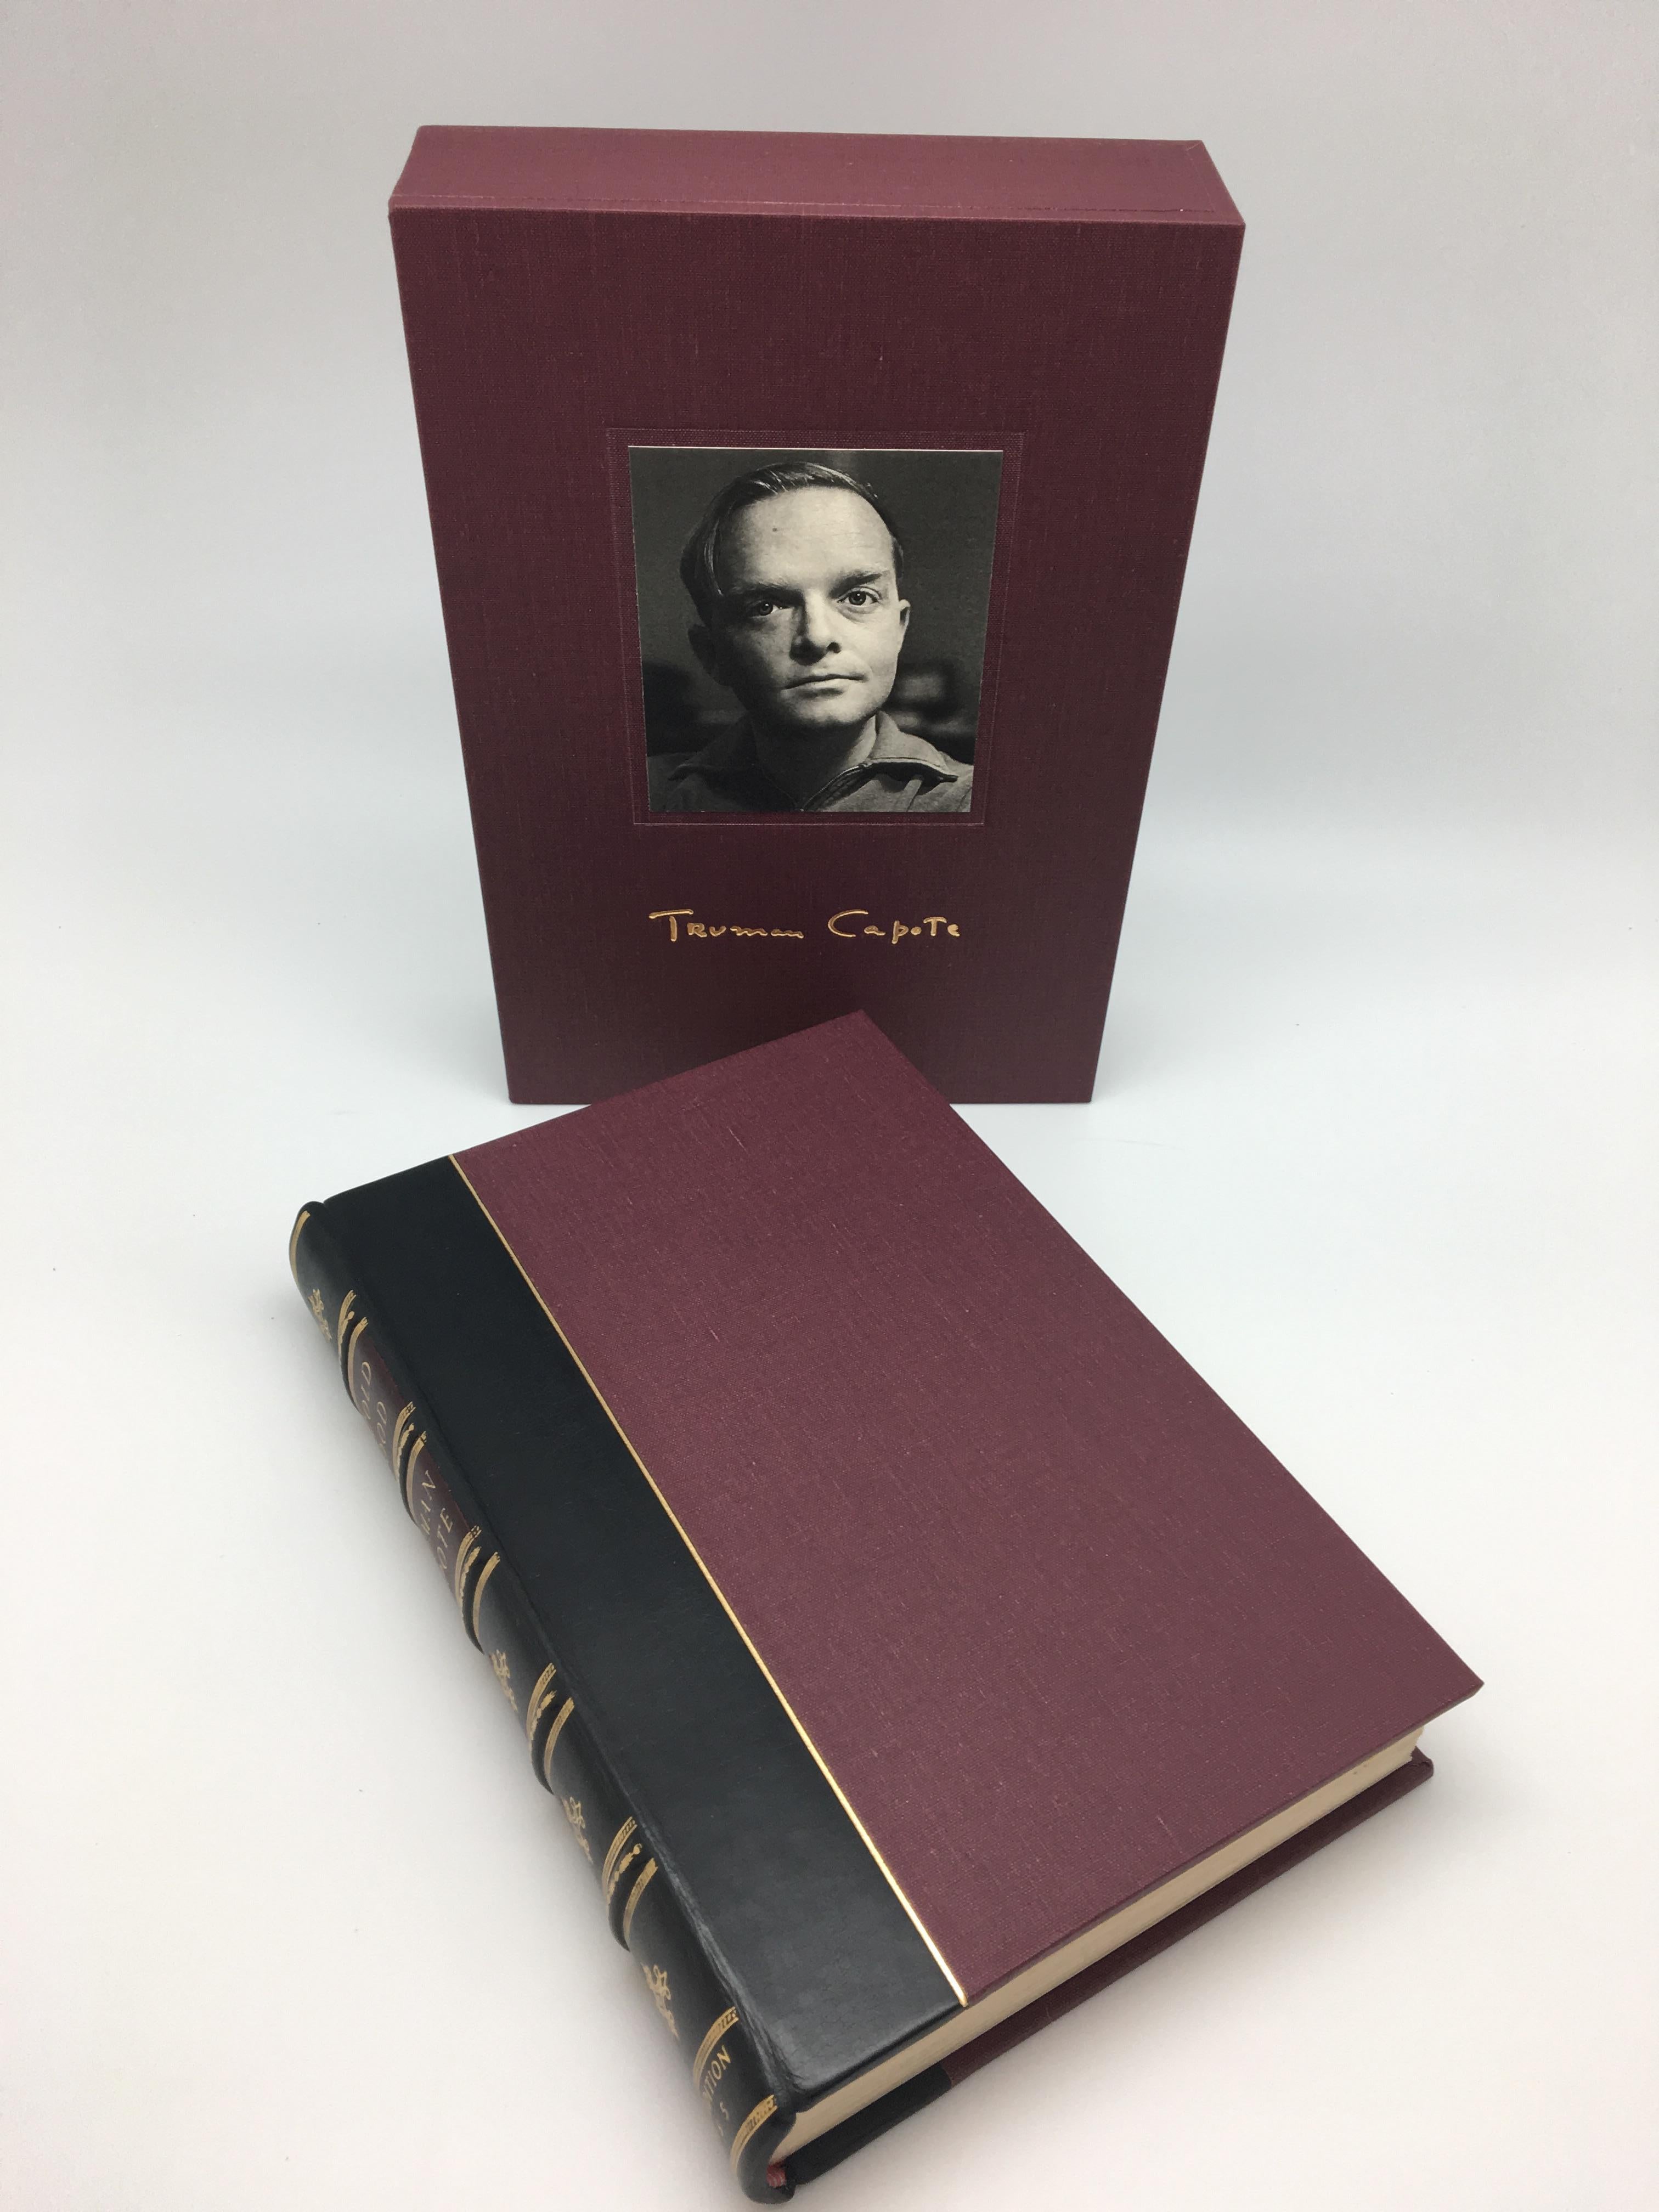 Capote, Truman, In Cold Blood. New York: Random House, Inc., 1965. First edition, first printing. Octavo, custom quarter leather binding with gilt tooling and raised bands on spine and matching slipcase. 

This is a first edition printing of In Cold